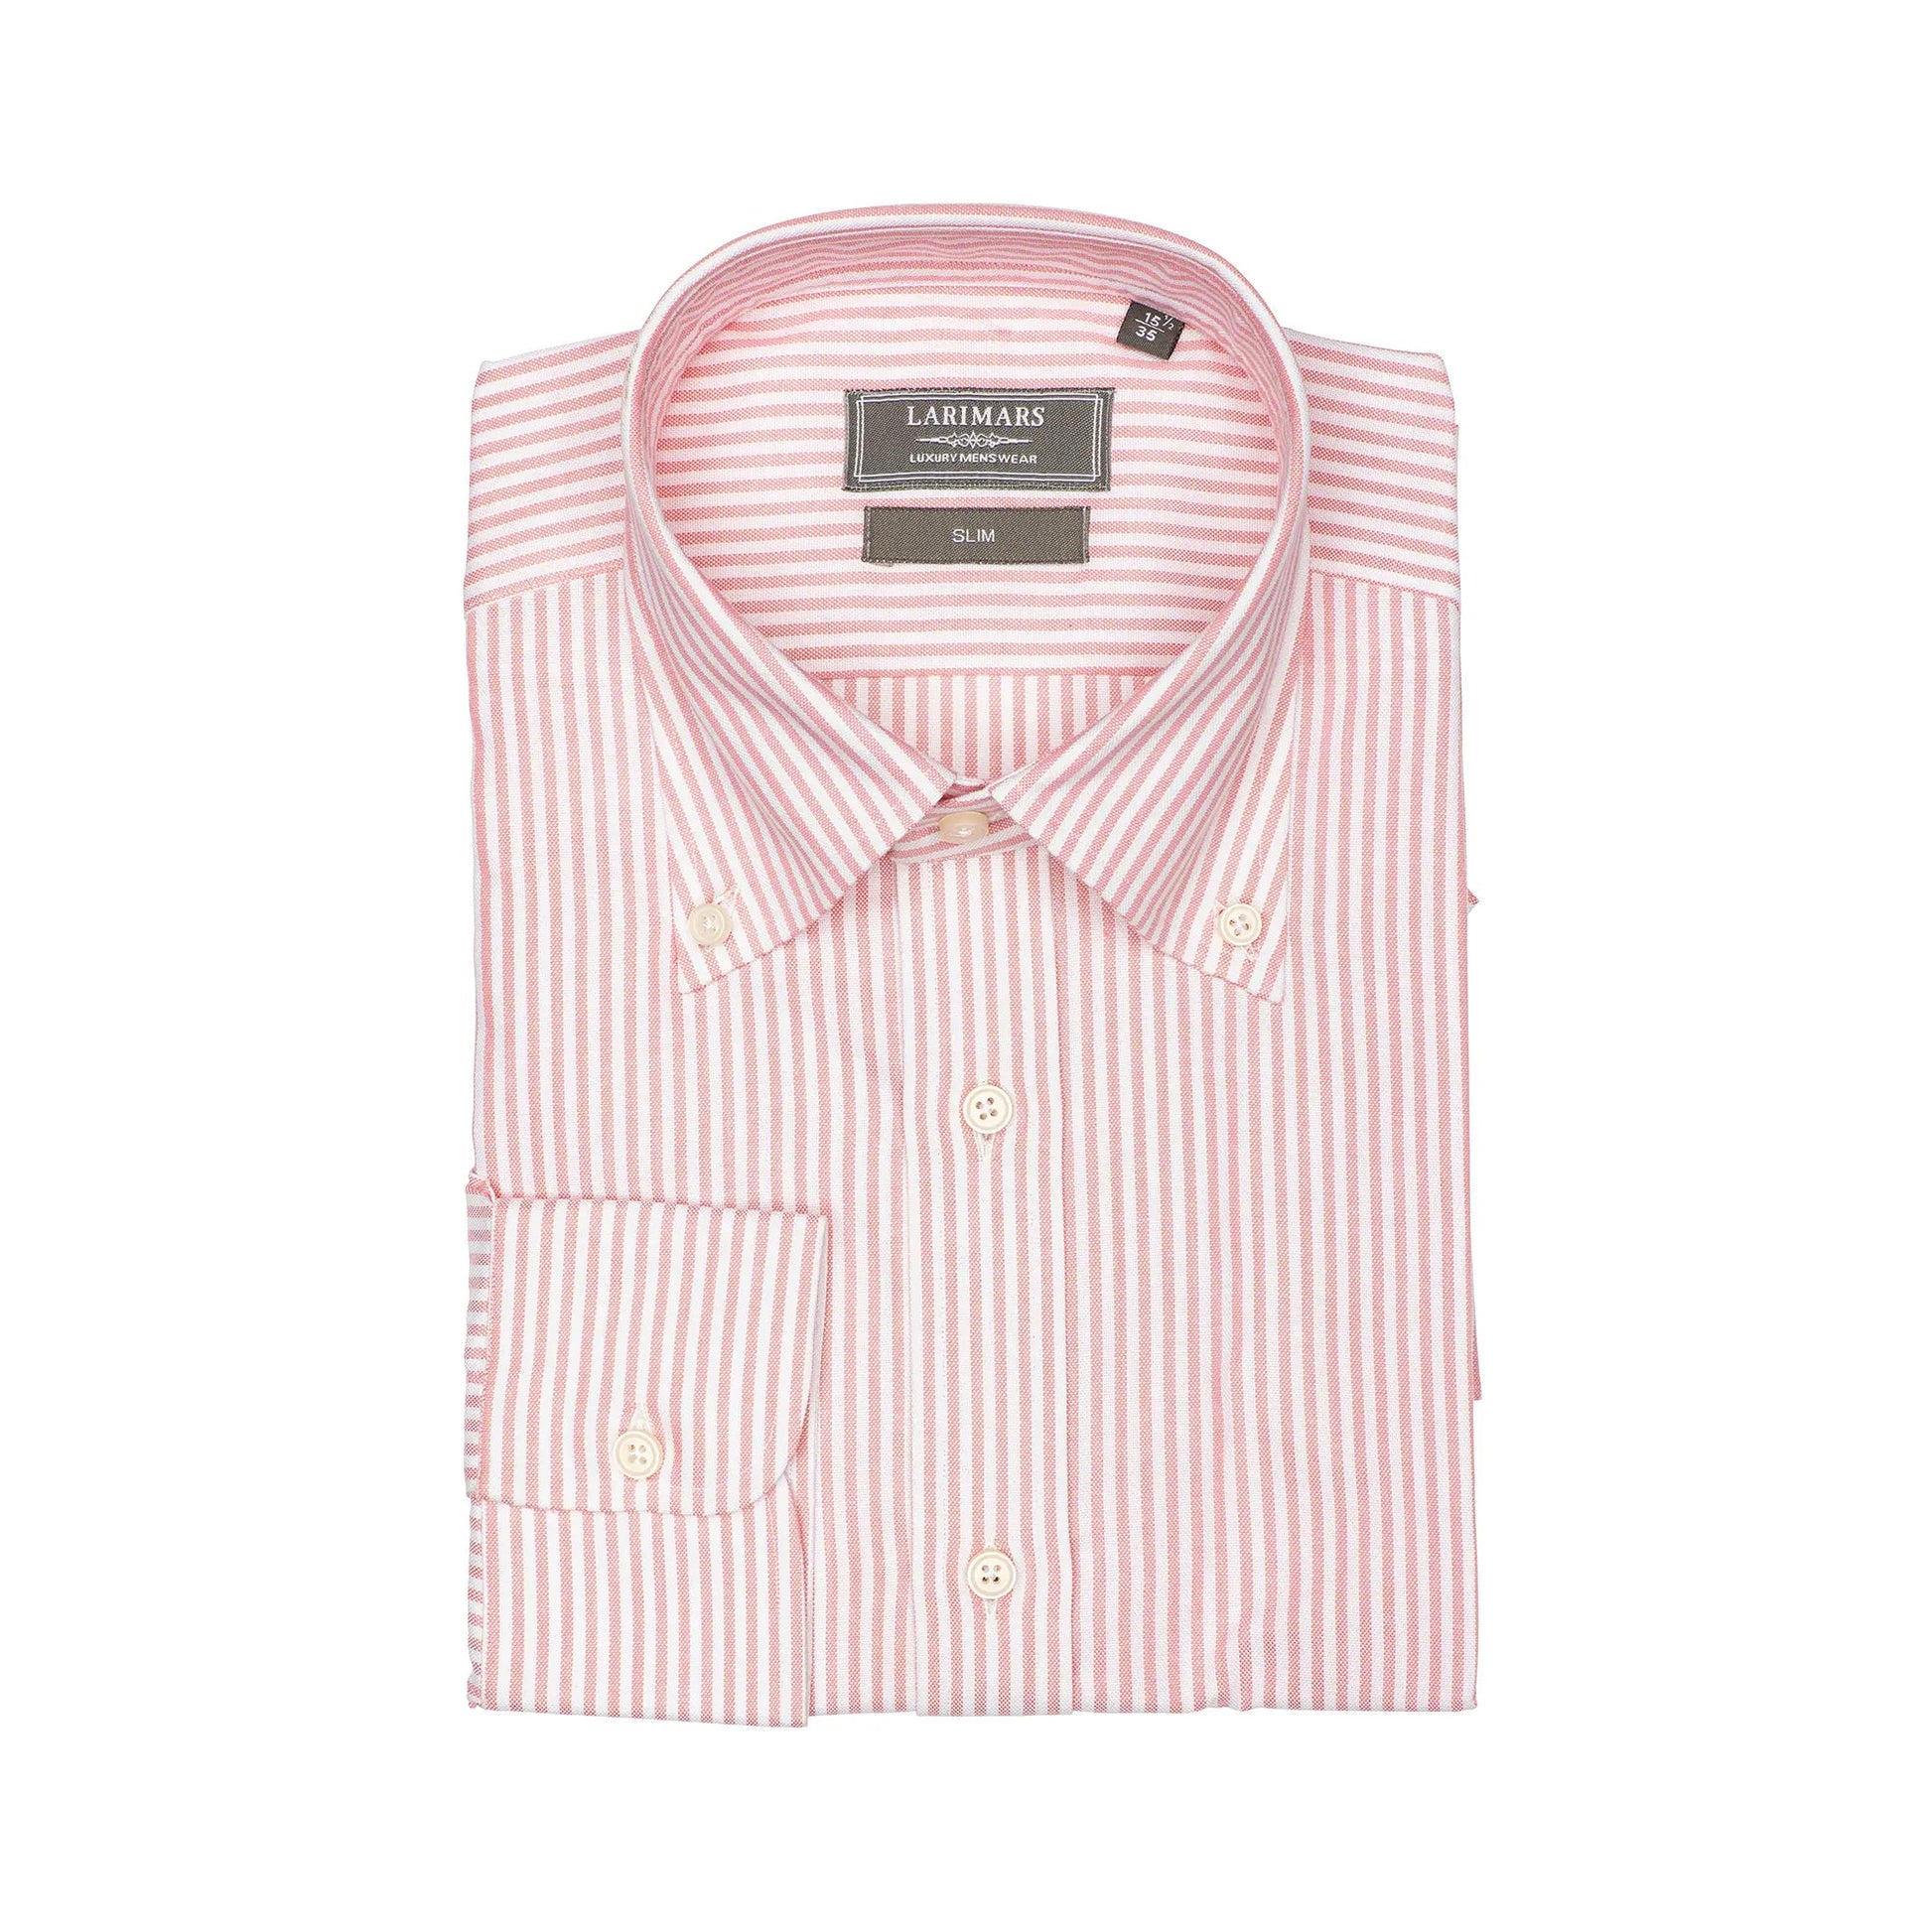 Baby Pink Stripe | Light Weight Oxford - Larimars Clothing Men's Formal and casual wear shirts